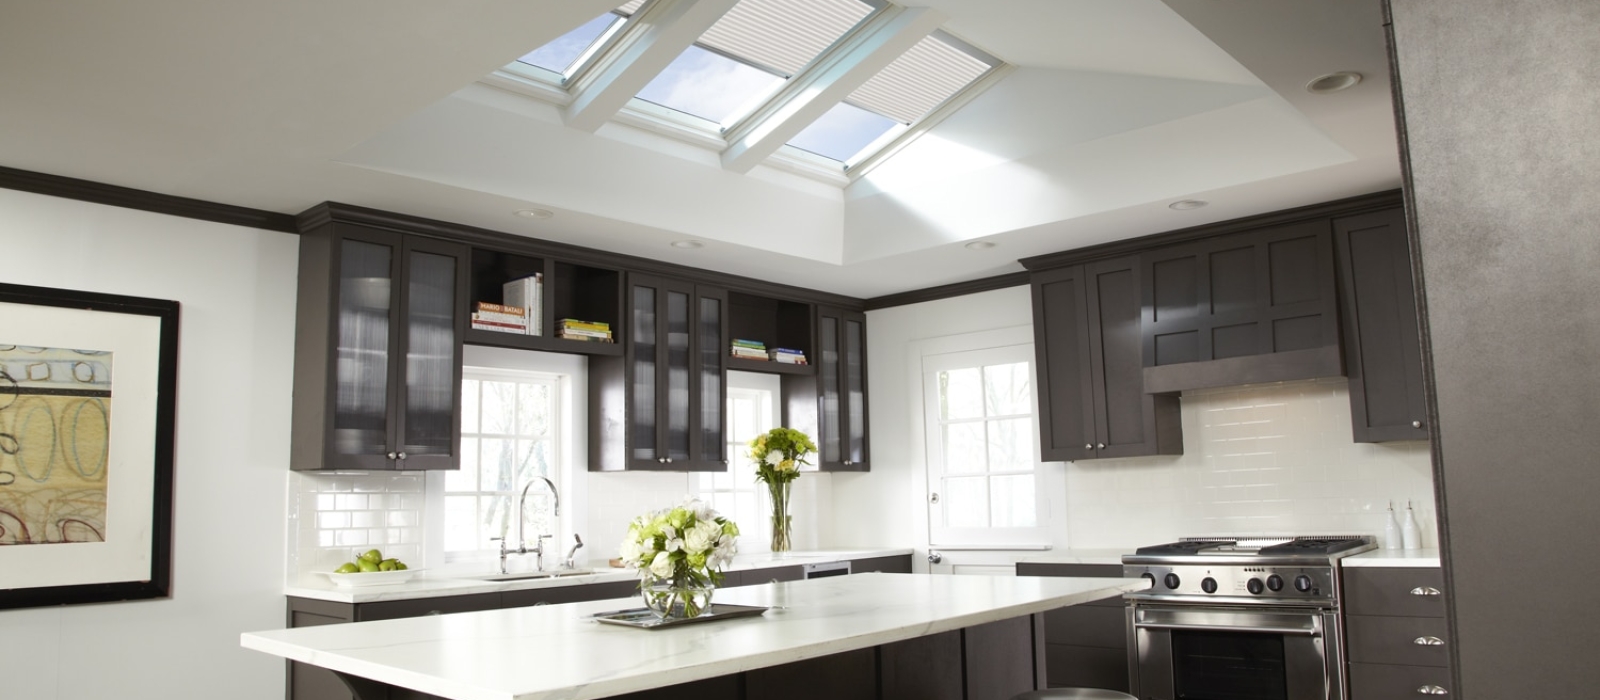 Application-kitchen-with-blinds-566-Skylights-Kitchen-0518